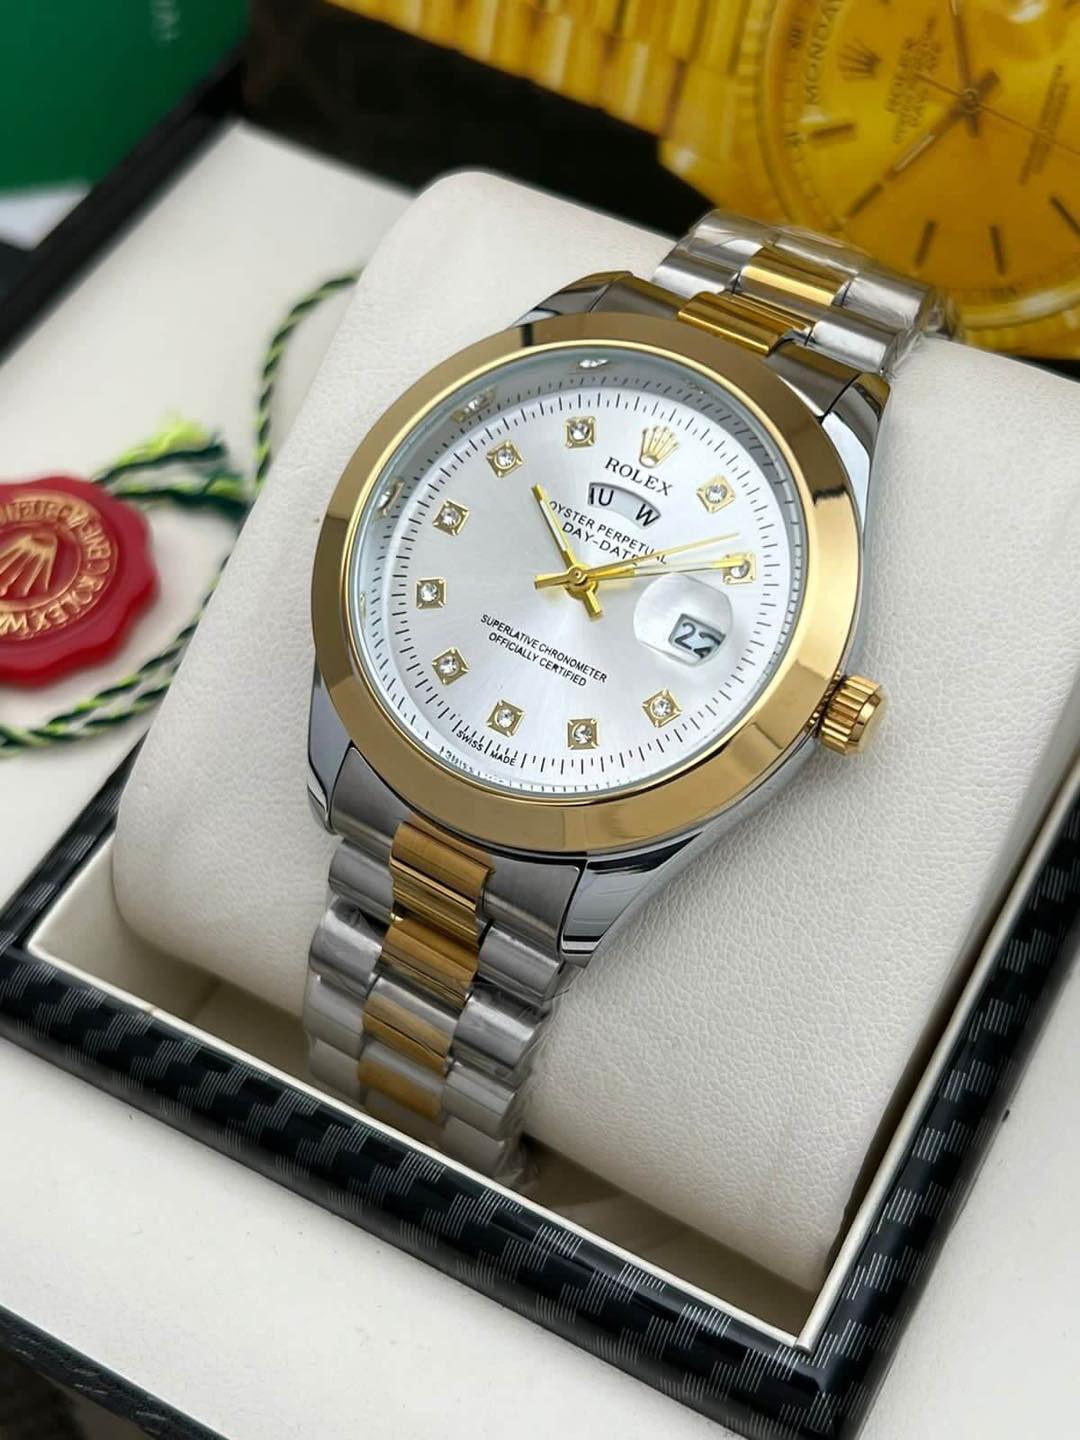 ROLEX Watch – HIGH COPY! Limited Stock!